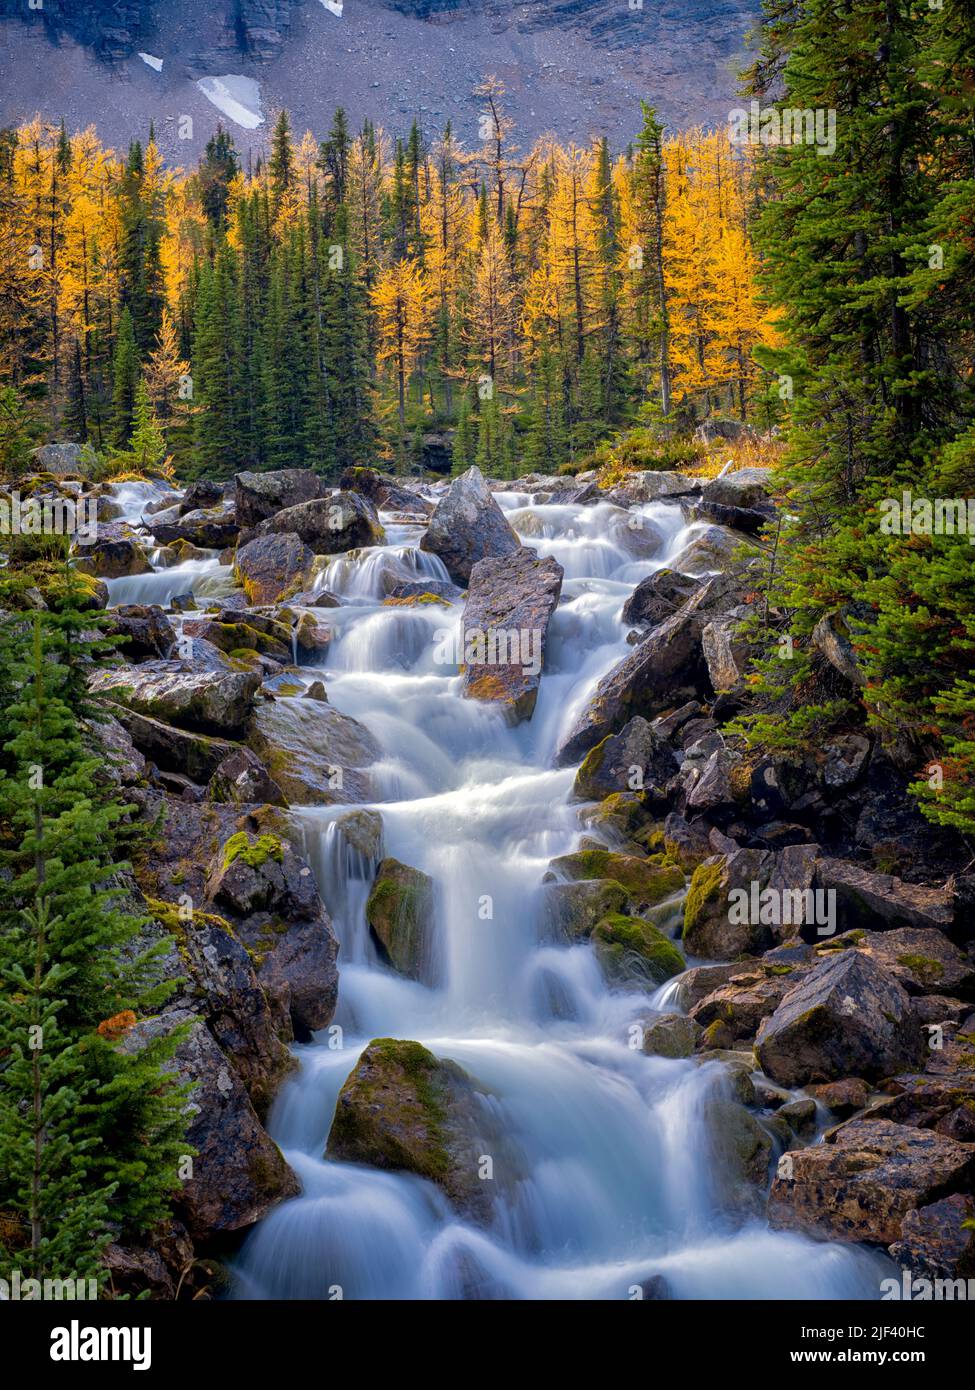 Stream flows from the Opabin Plateau past fall colored larch trees. Yoho National Park, Opabin Plateau, British Columbia, Canada Stock Photo